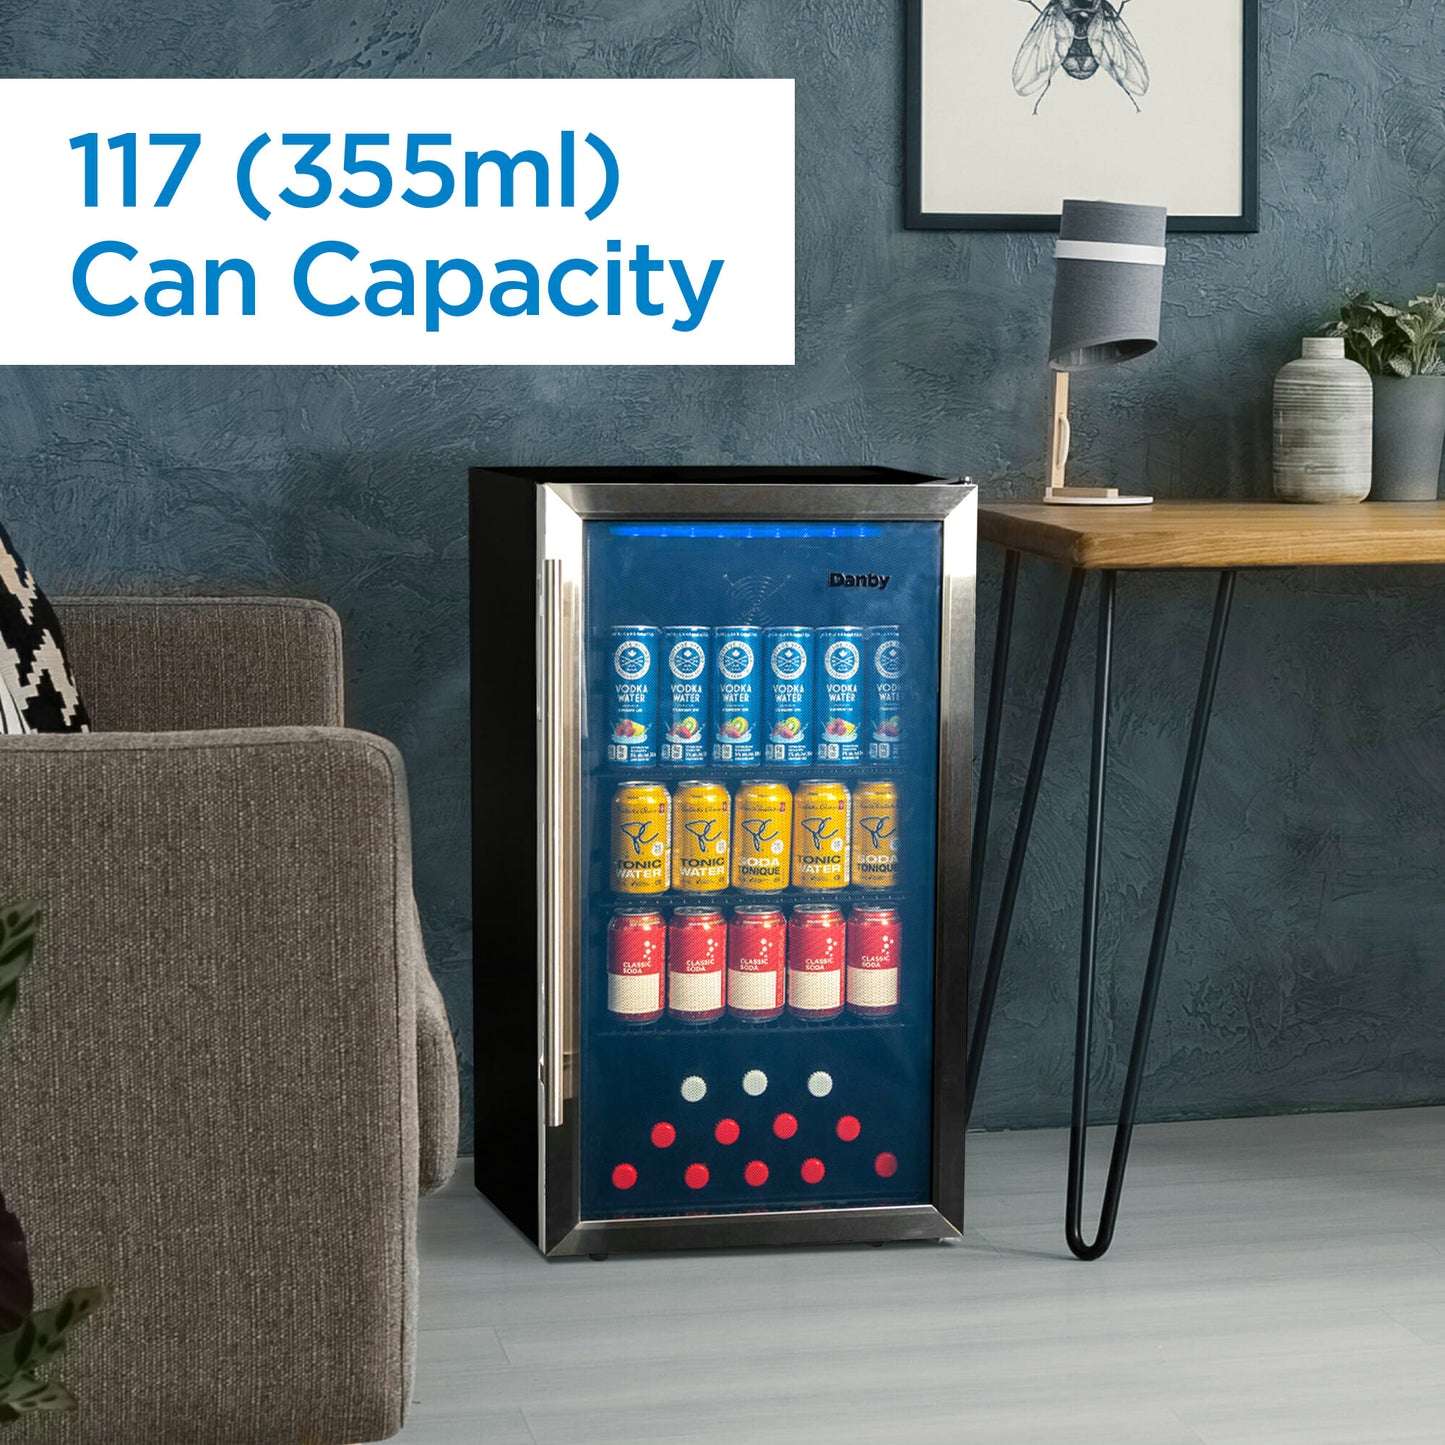 Danby 3.1 cu. ft. Free-Standing Beverage Center in Stainless Steel - DBC117A2BSSDD-6